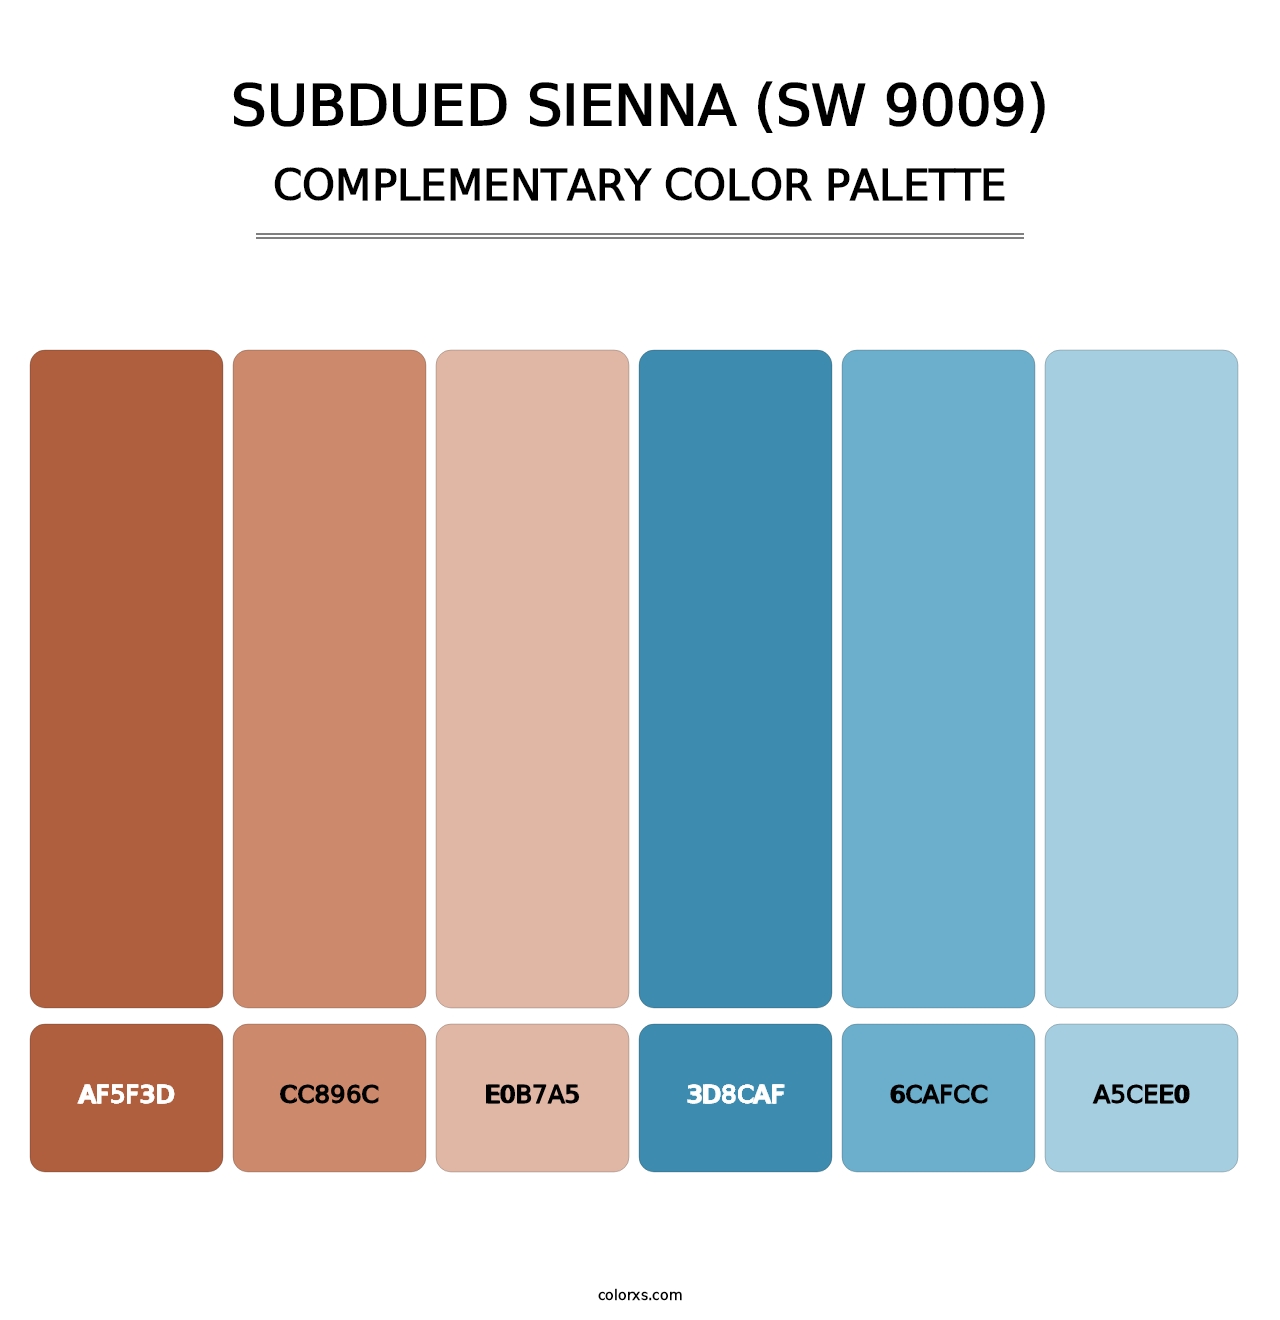 Subdued Sienna (SW 9009) - Complementary Color Palette